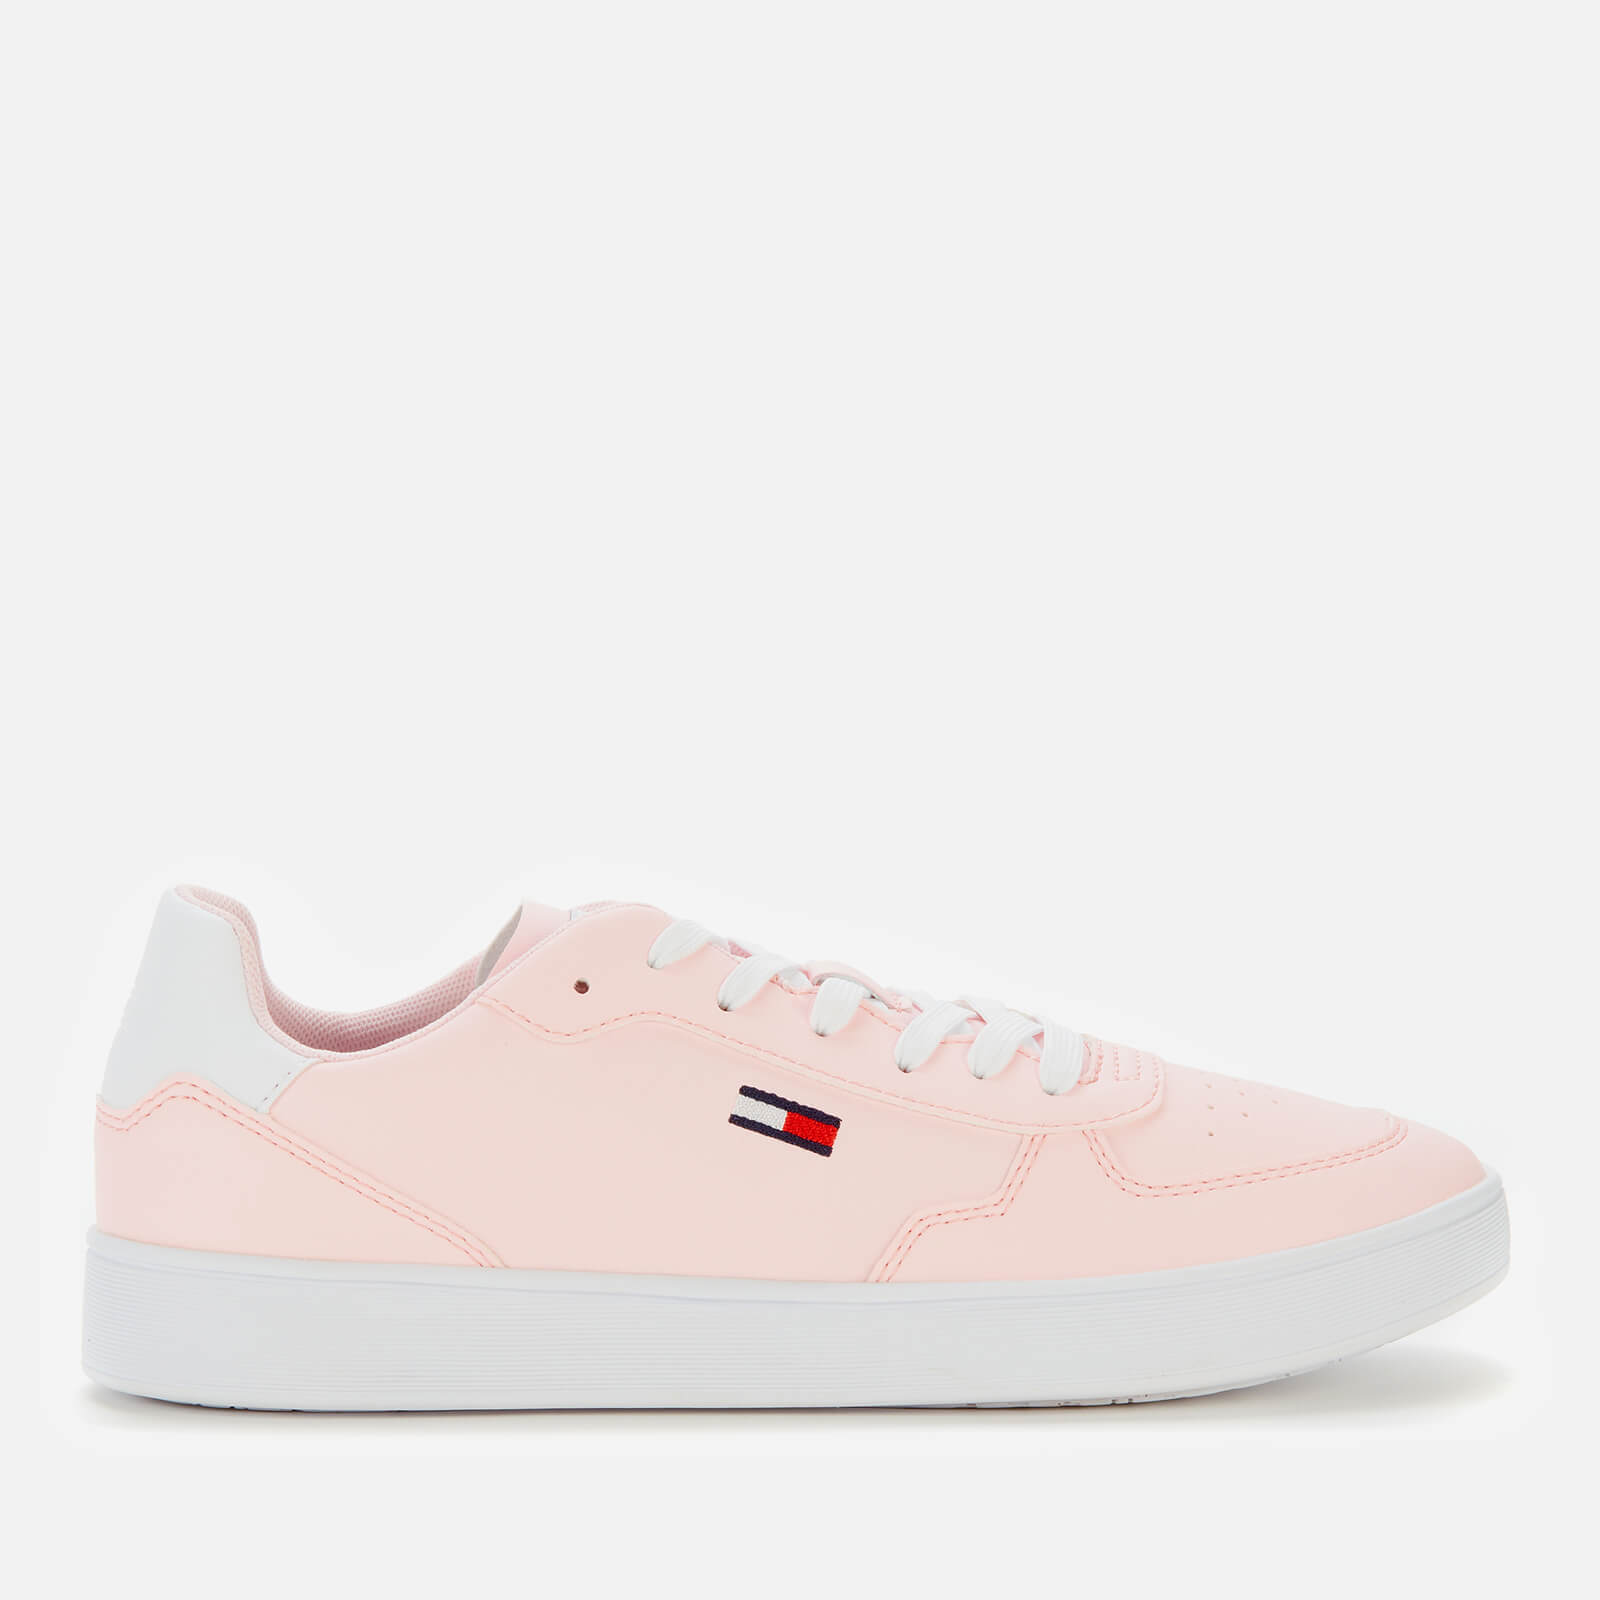 Tommy Jeans Women's Cupsole Trainers - Light Pink - UK 3.5